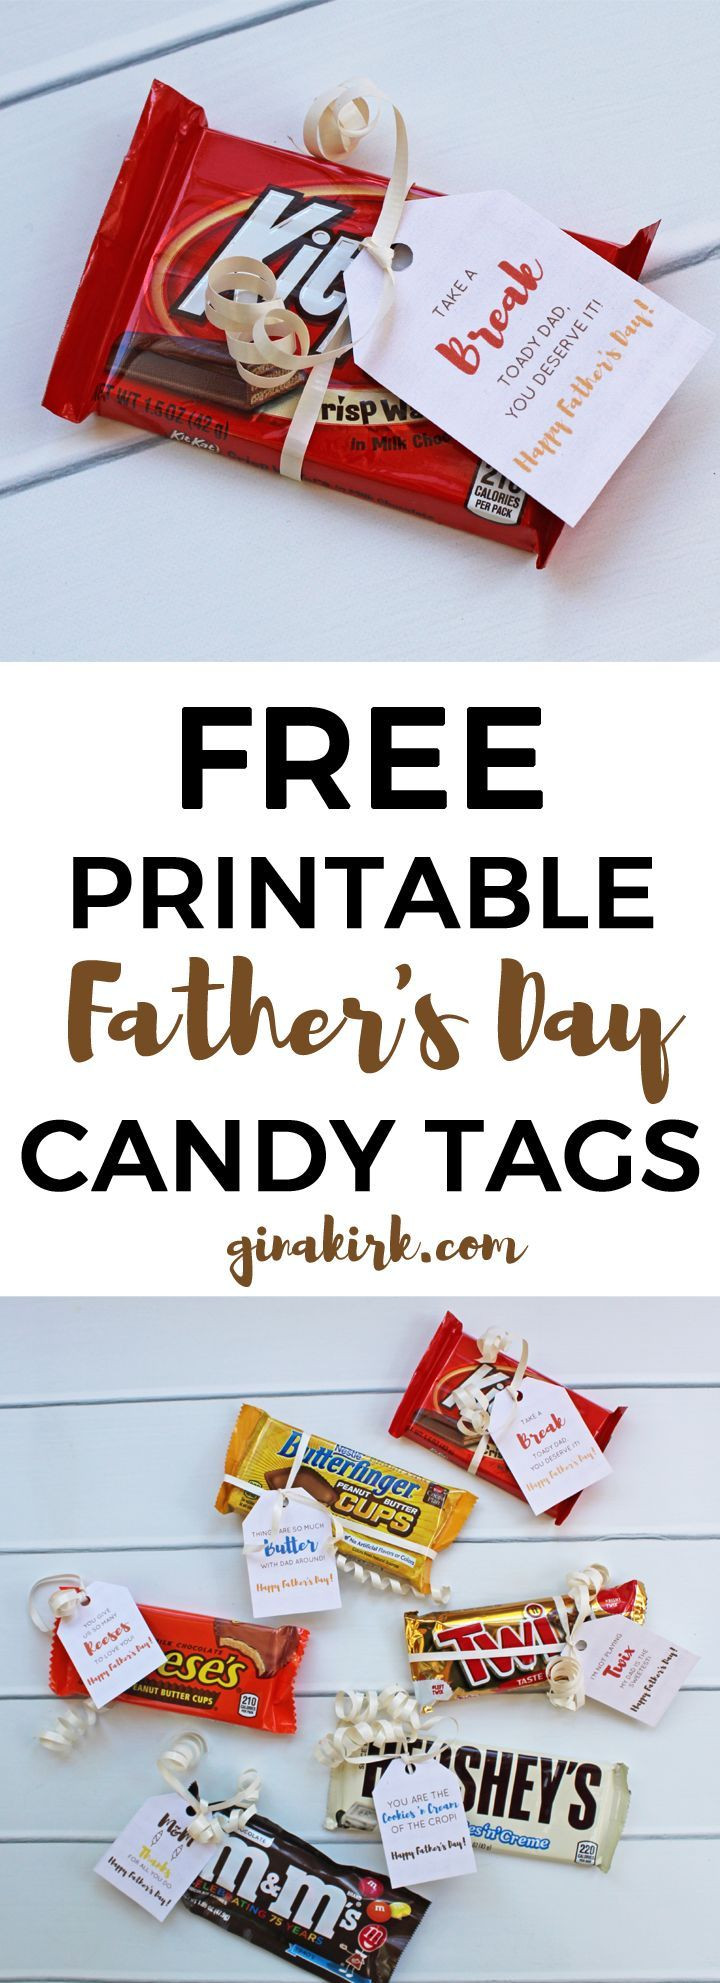 Free Fathers Day Gifts
 Free Printable Candy Tags for Father s Day